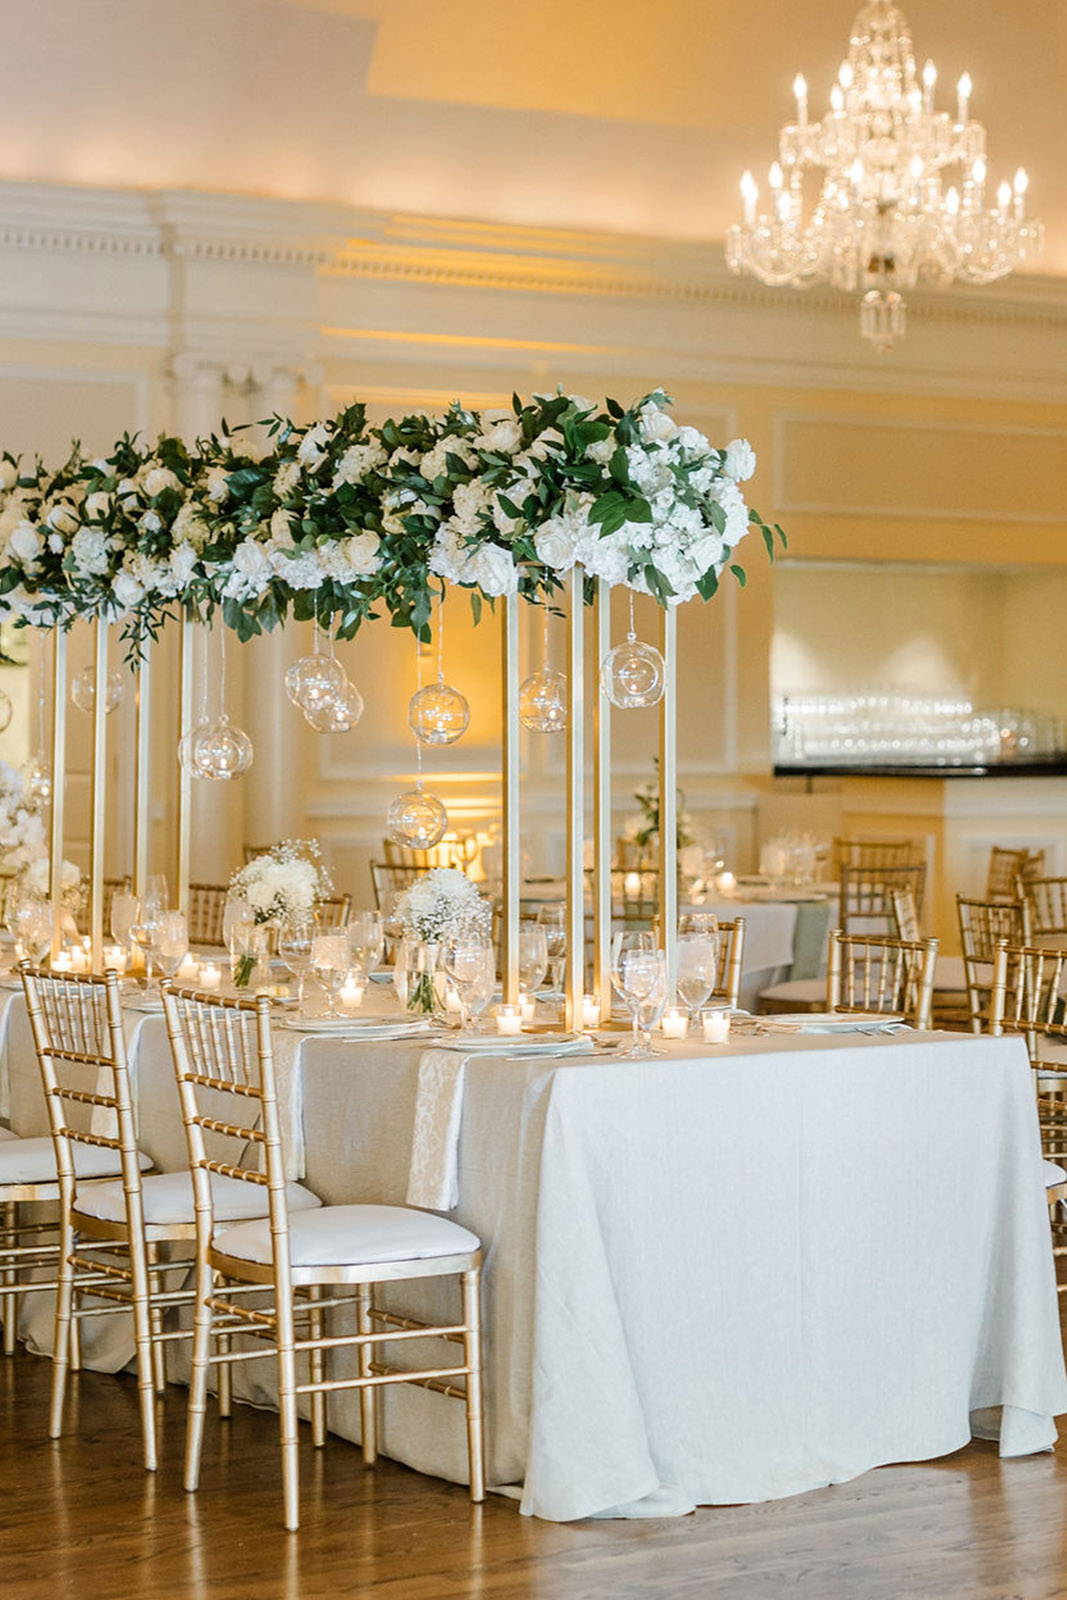 Reception table layout